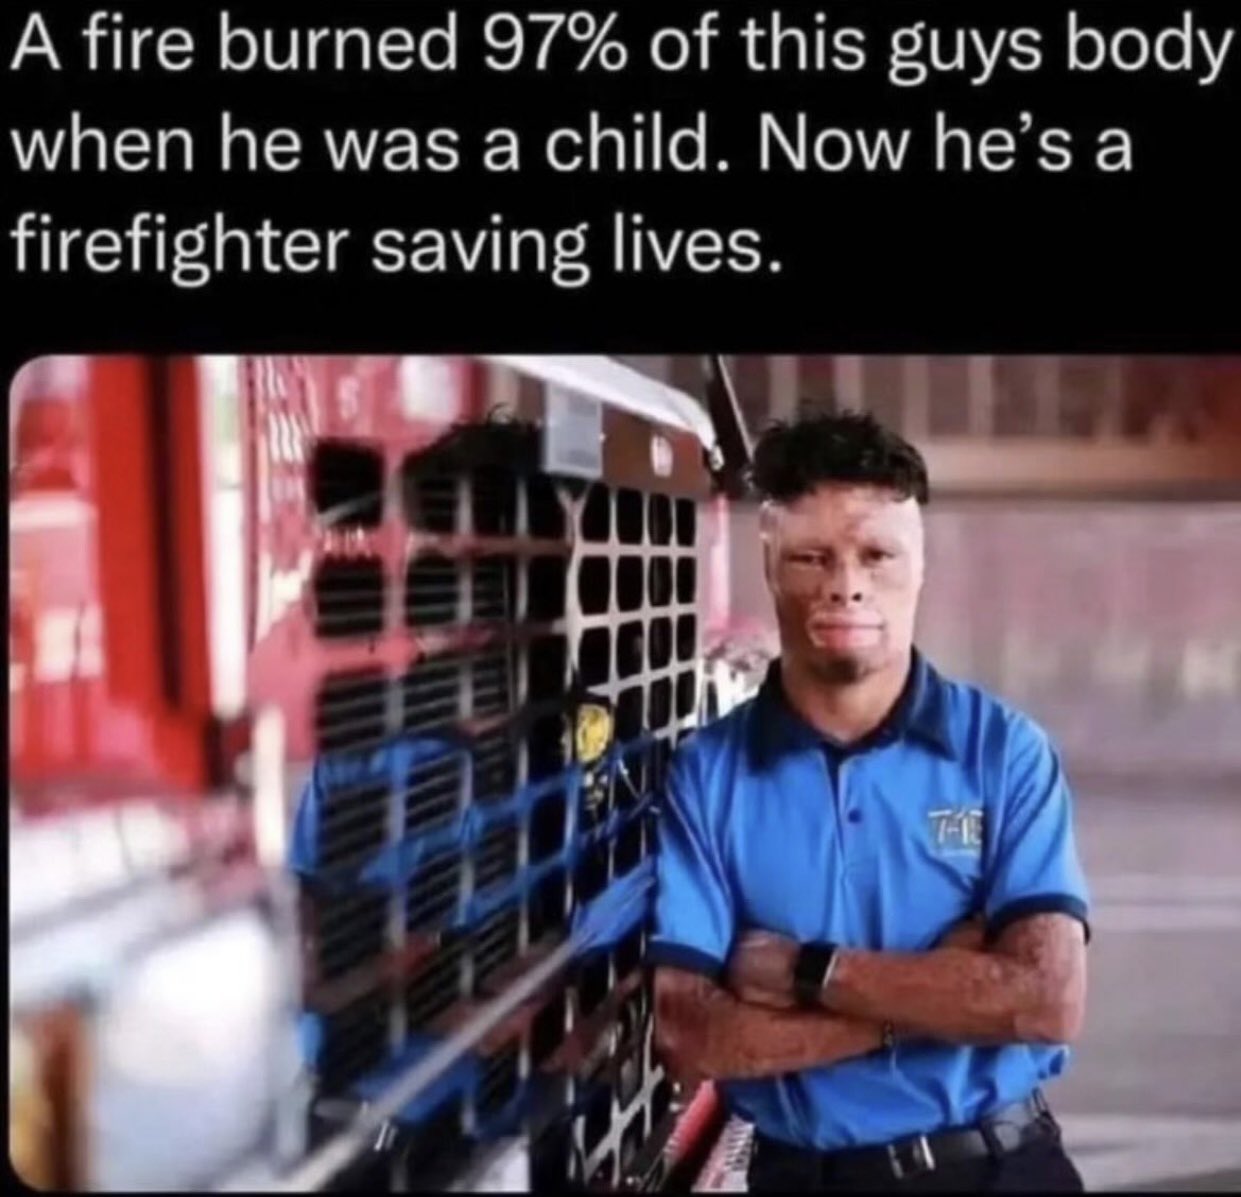 dudes posting their Ws - muscle - A fire burned 97% of this guys body when he was a child. Now he's a firefighter saving lives. The